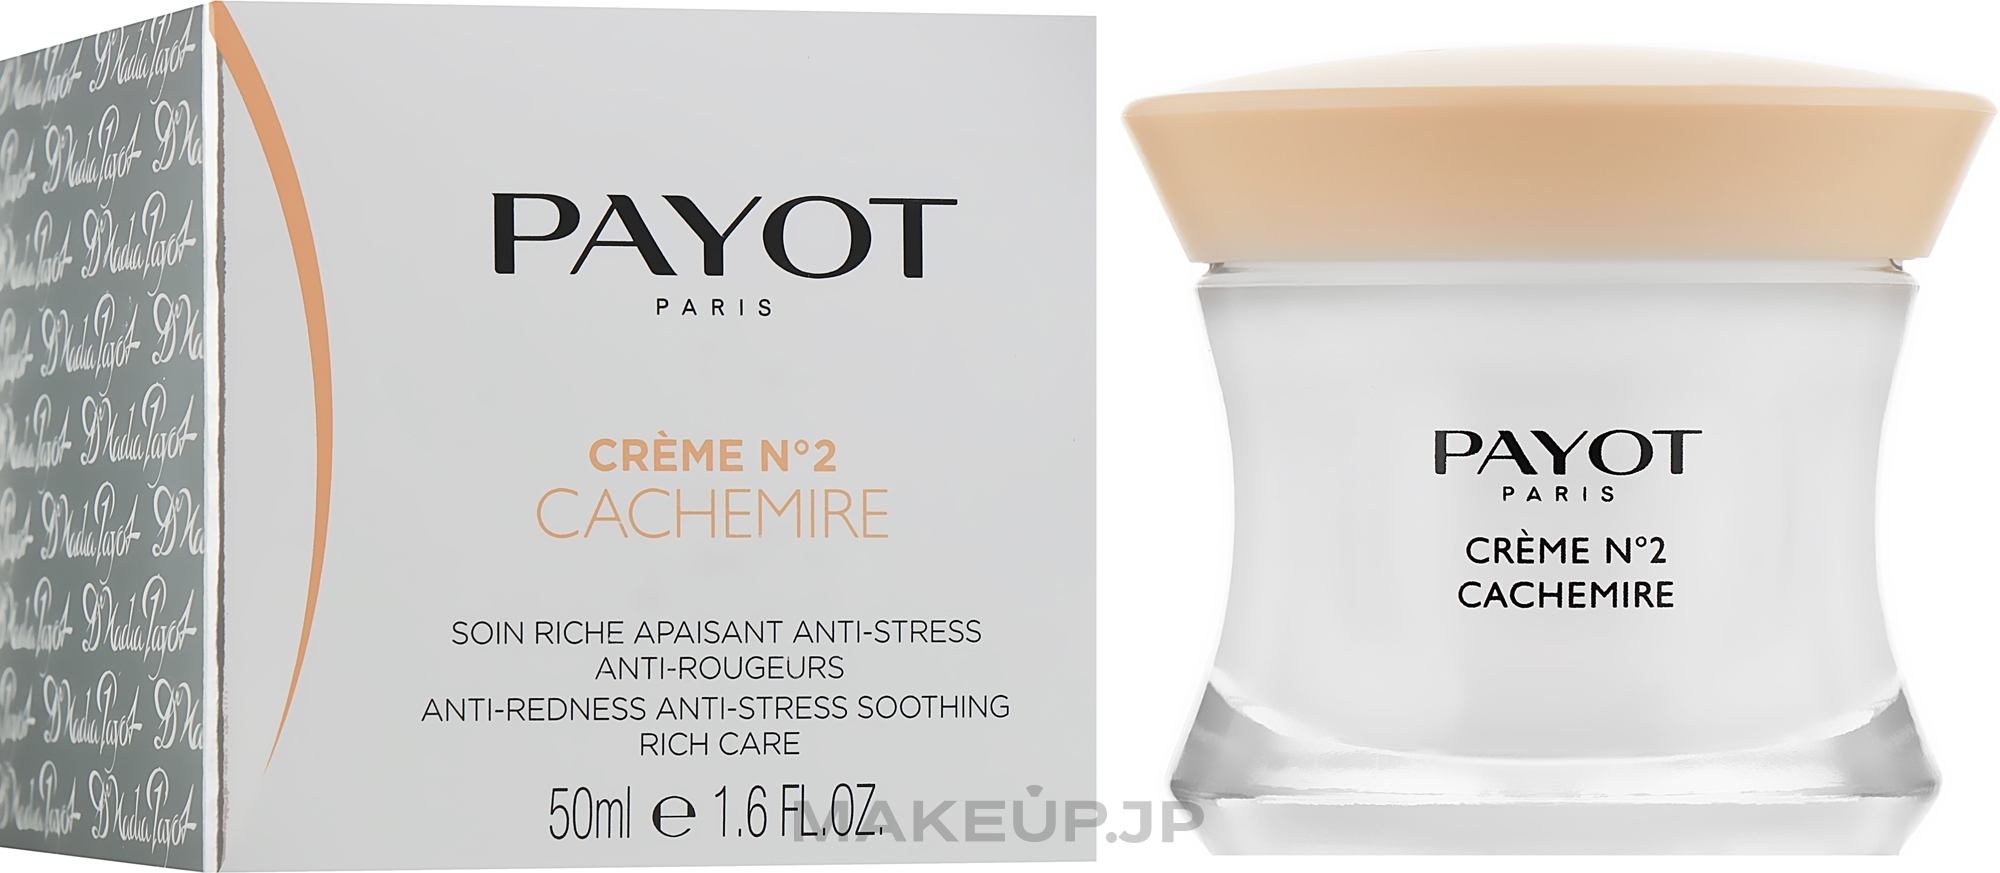 Anti-Redness Anti-Stress Soothing Rich Care - Payot Creme №2 Cachemire — photo 50 ml